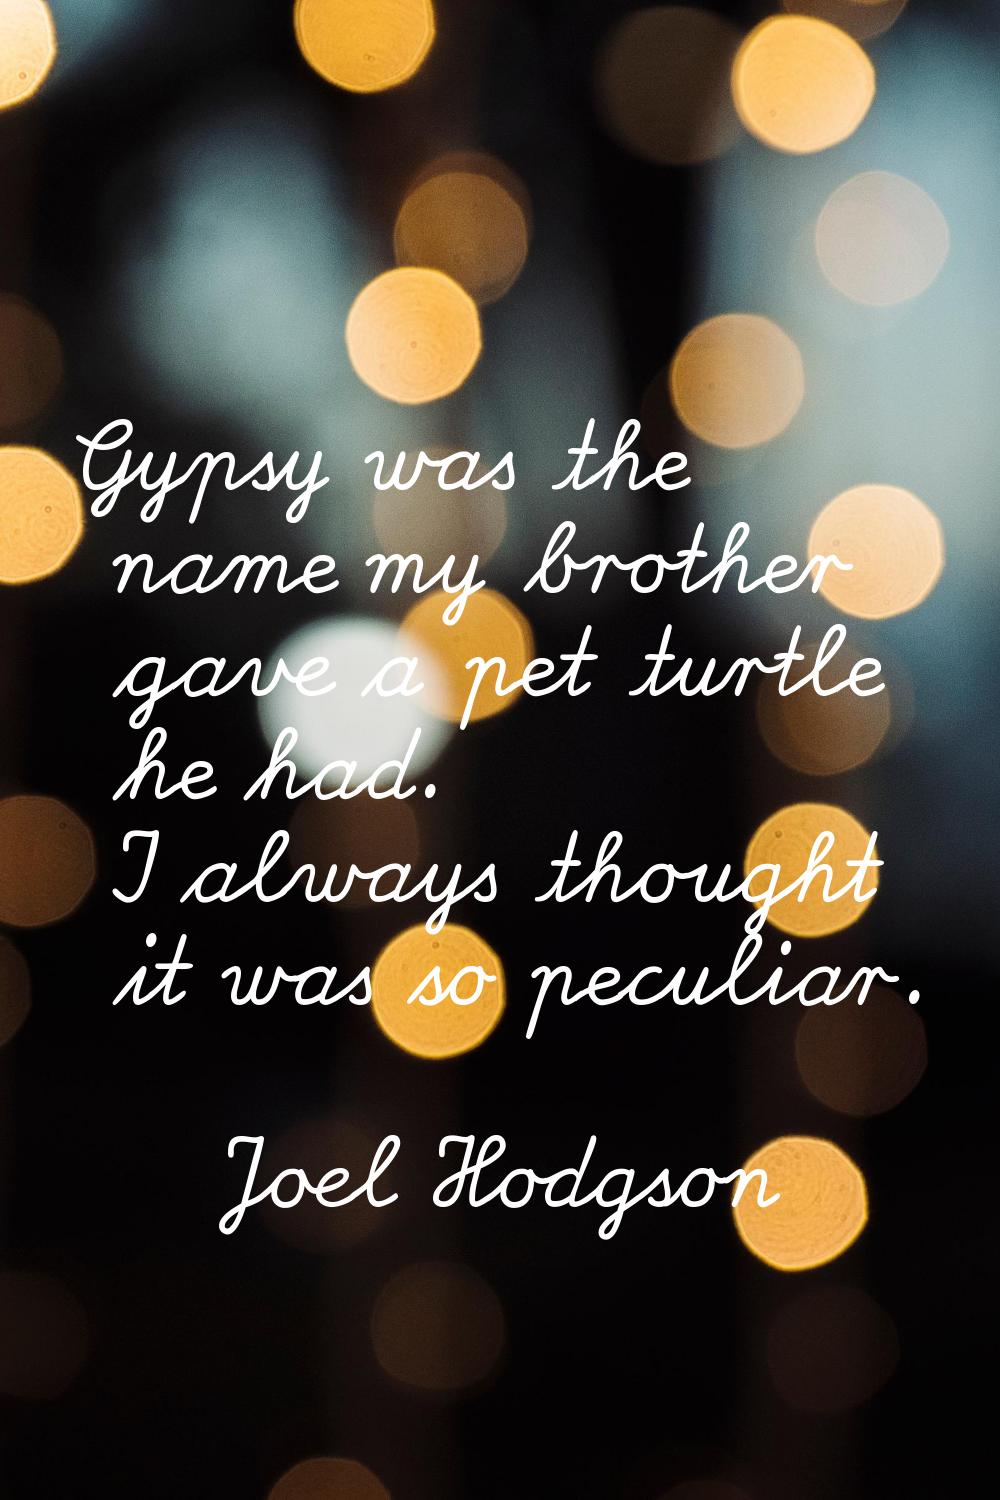 Gypsy was the name my brother gave a pet turtle he had. I always thought it was so peculiar.